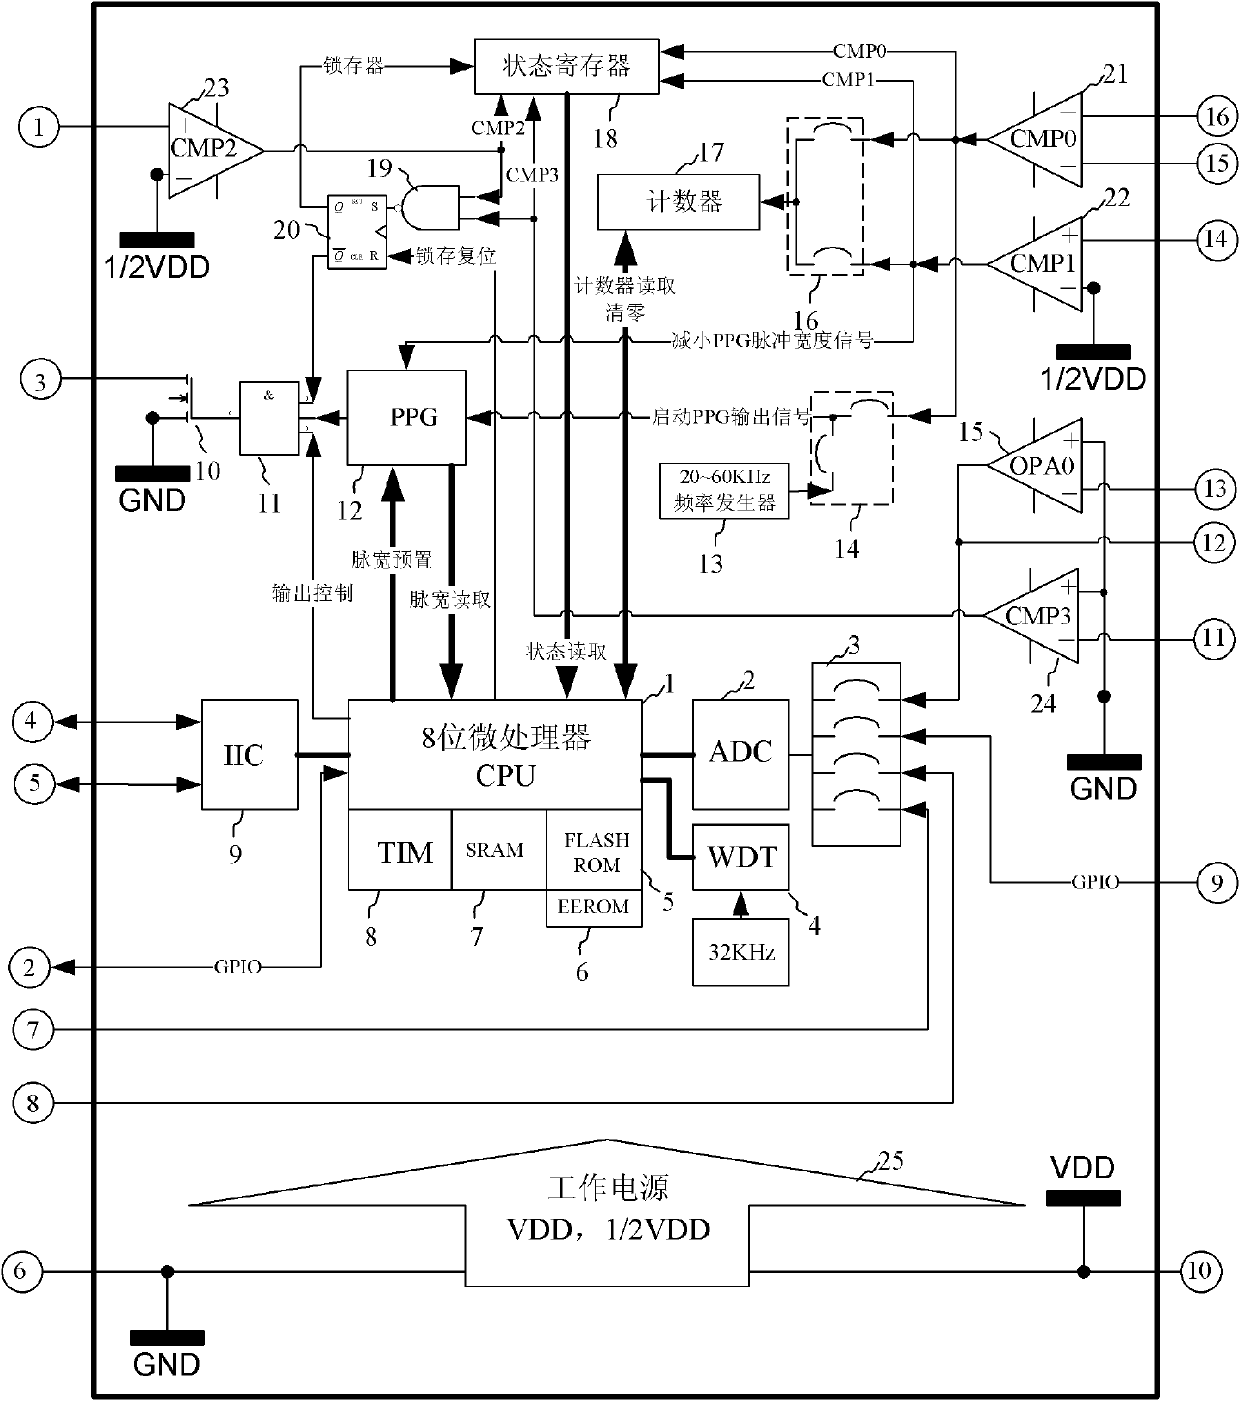 System On Chip (SOC) chip special for electromagnetic induction heating controller